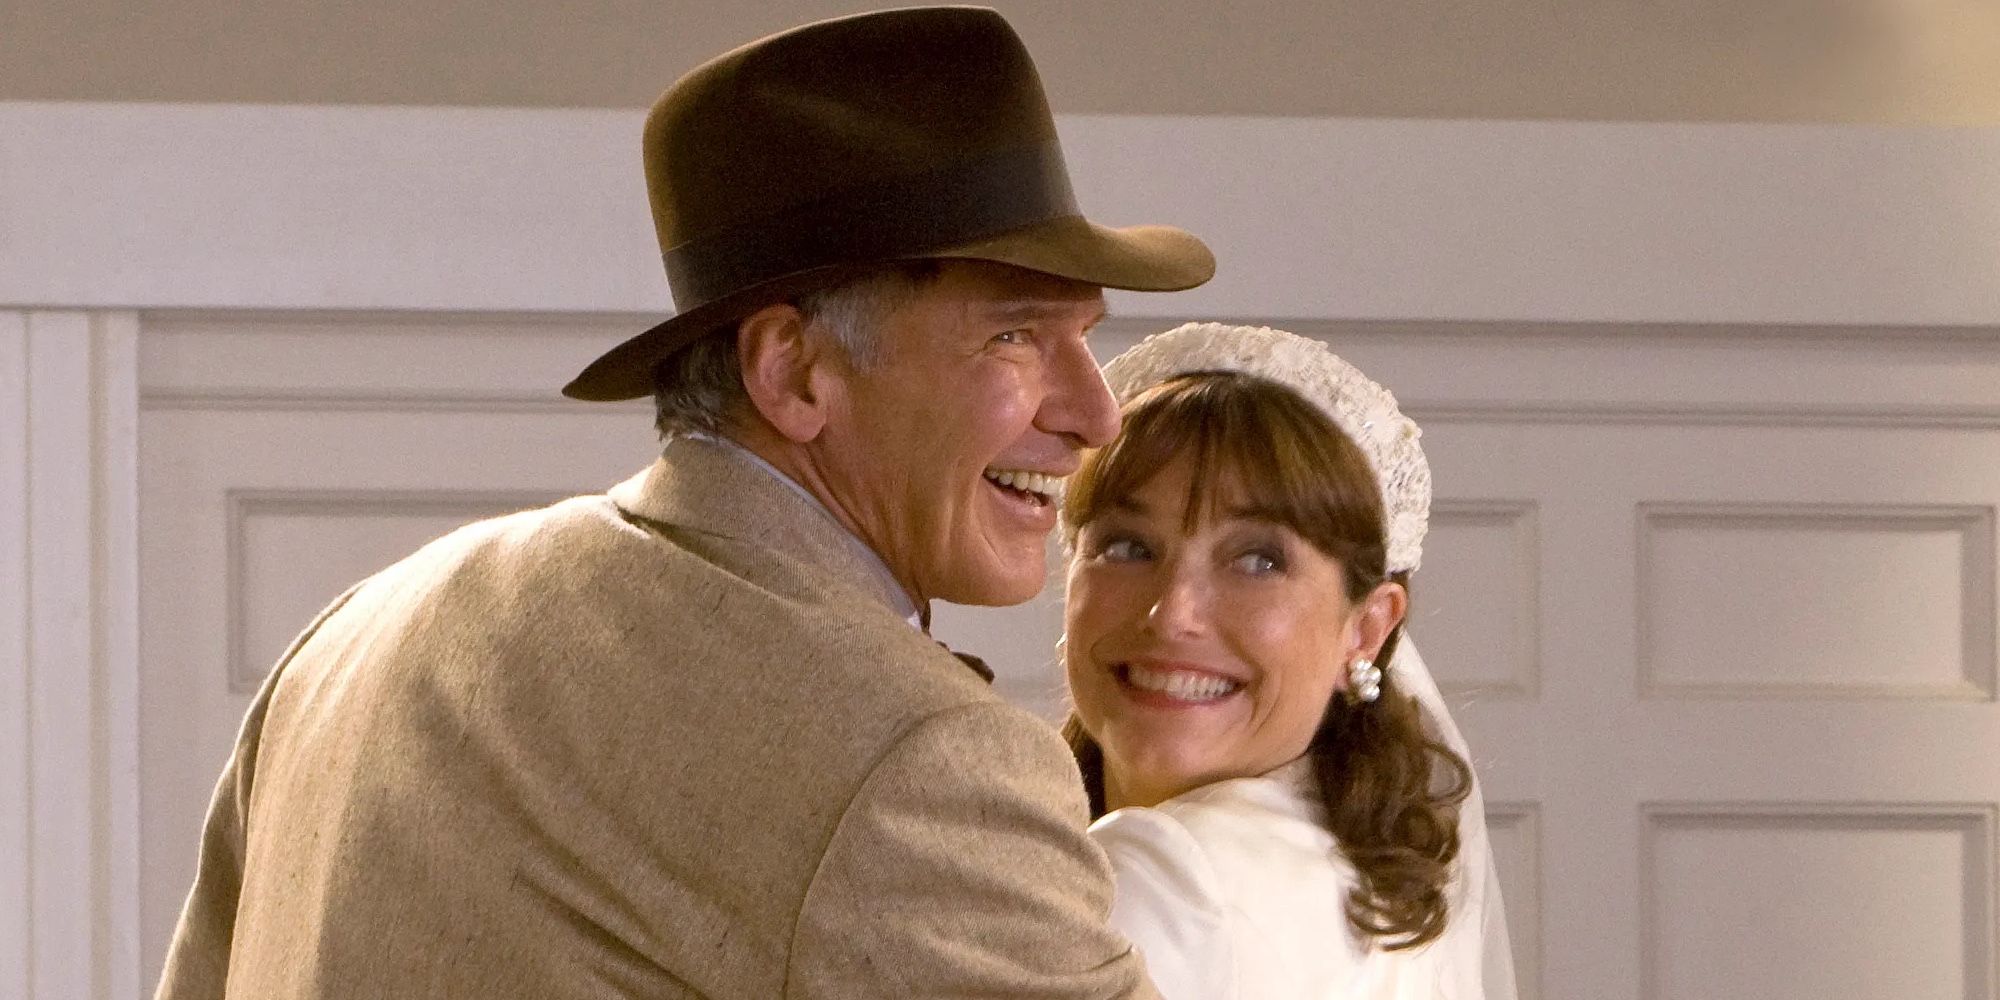 Indiana Jones and Marion look over their shoulders and smile.